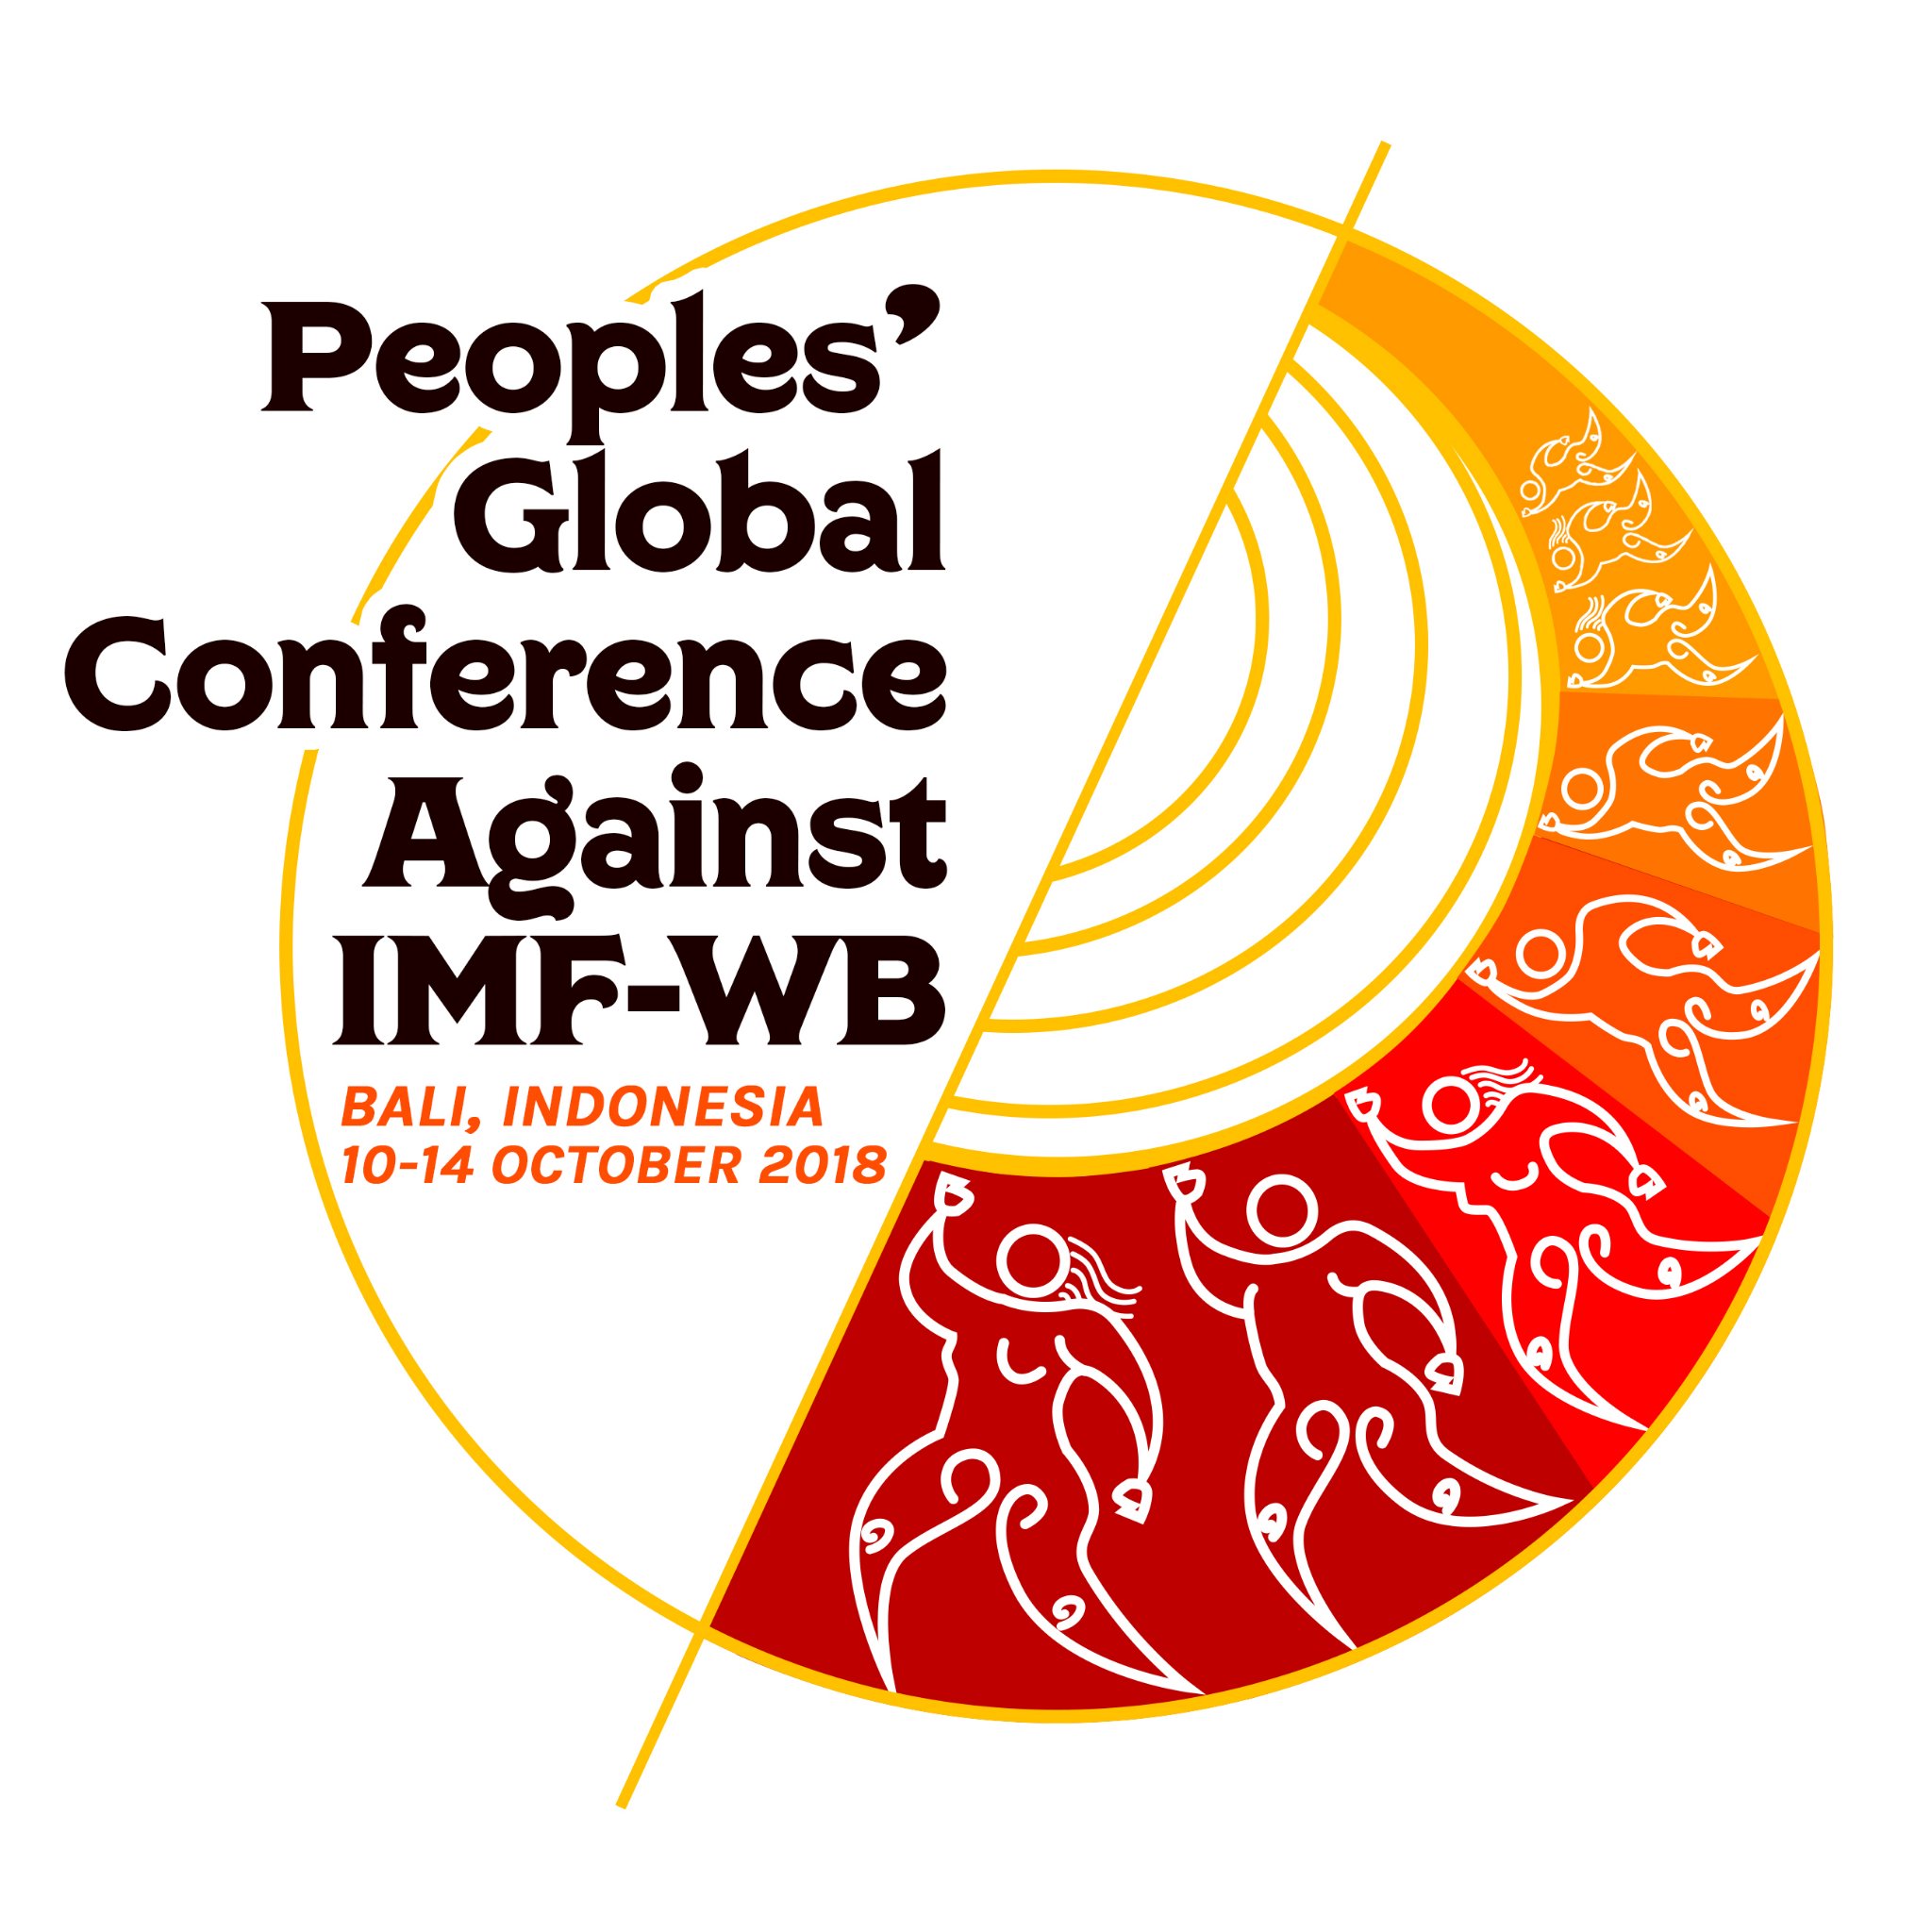 Independent initiative to register peoples’ resistance against IMF-WB’s corporatization of development, and to assert the right to a just and equitable future